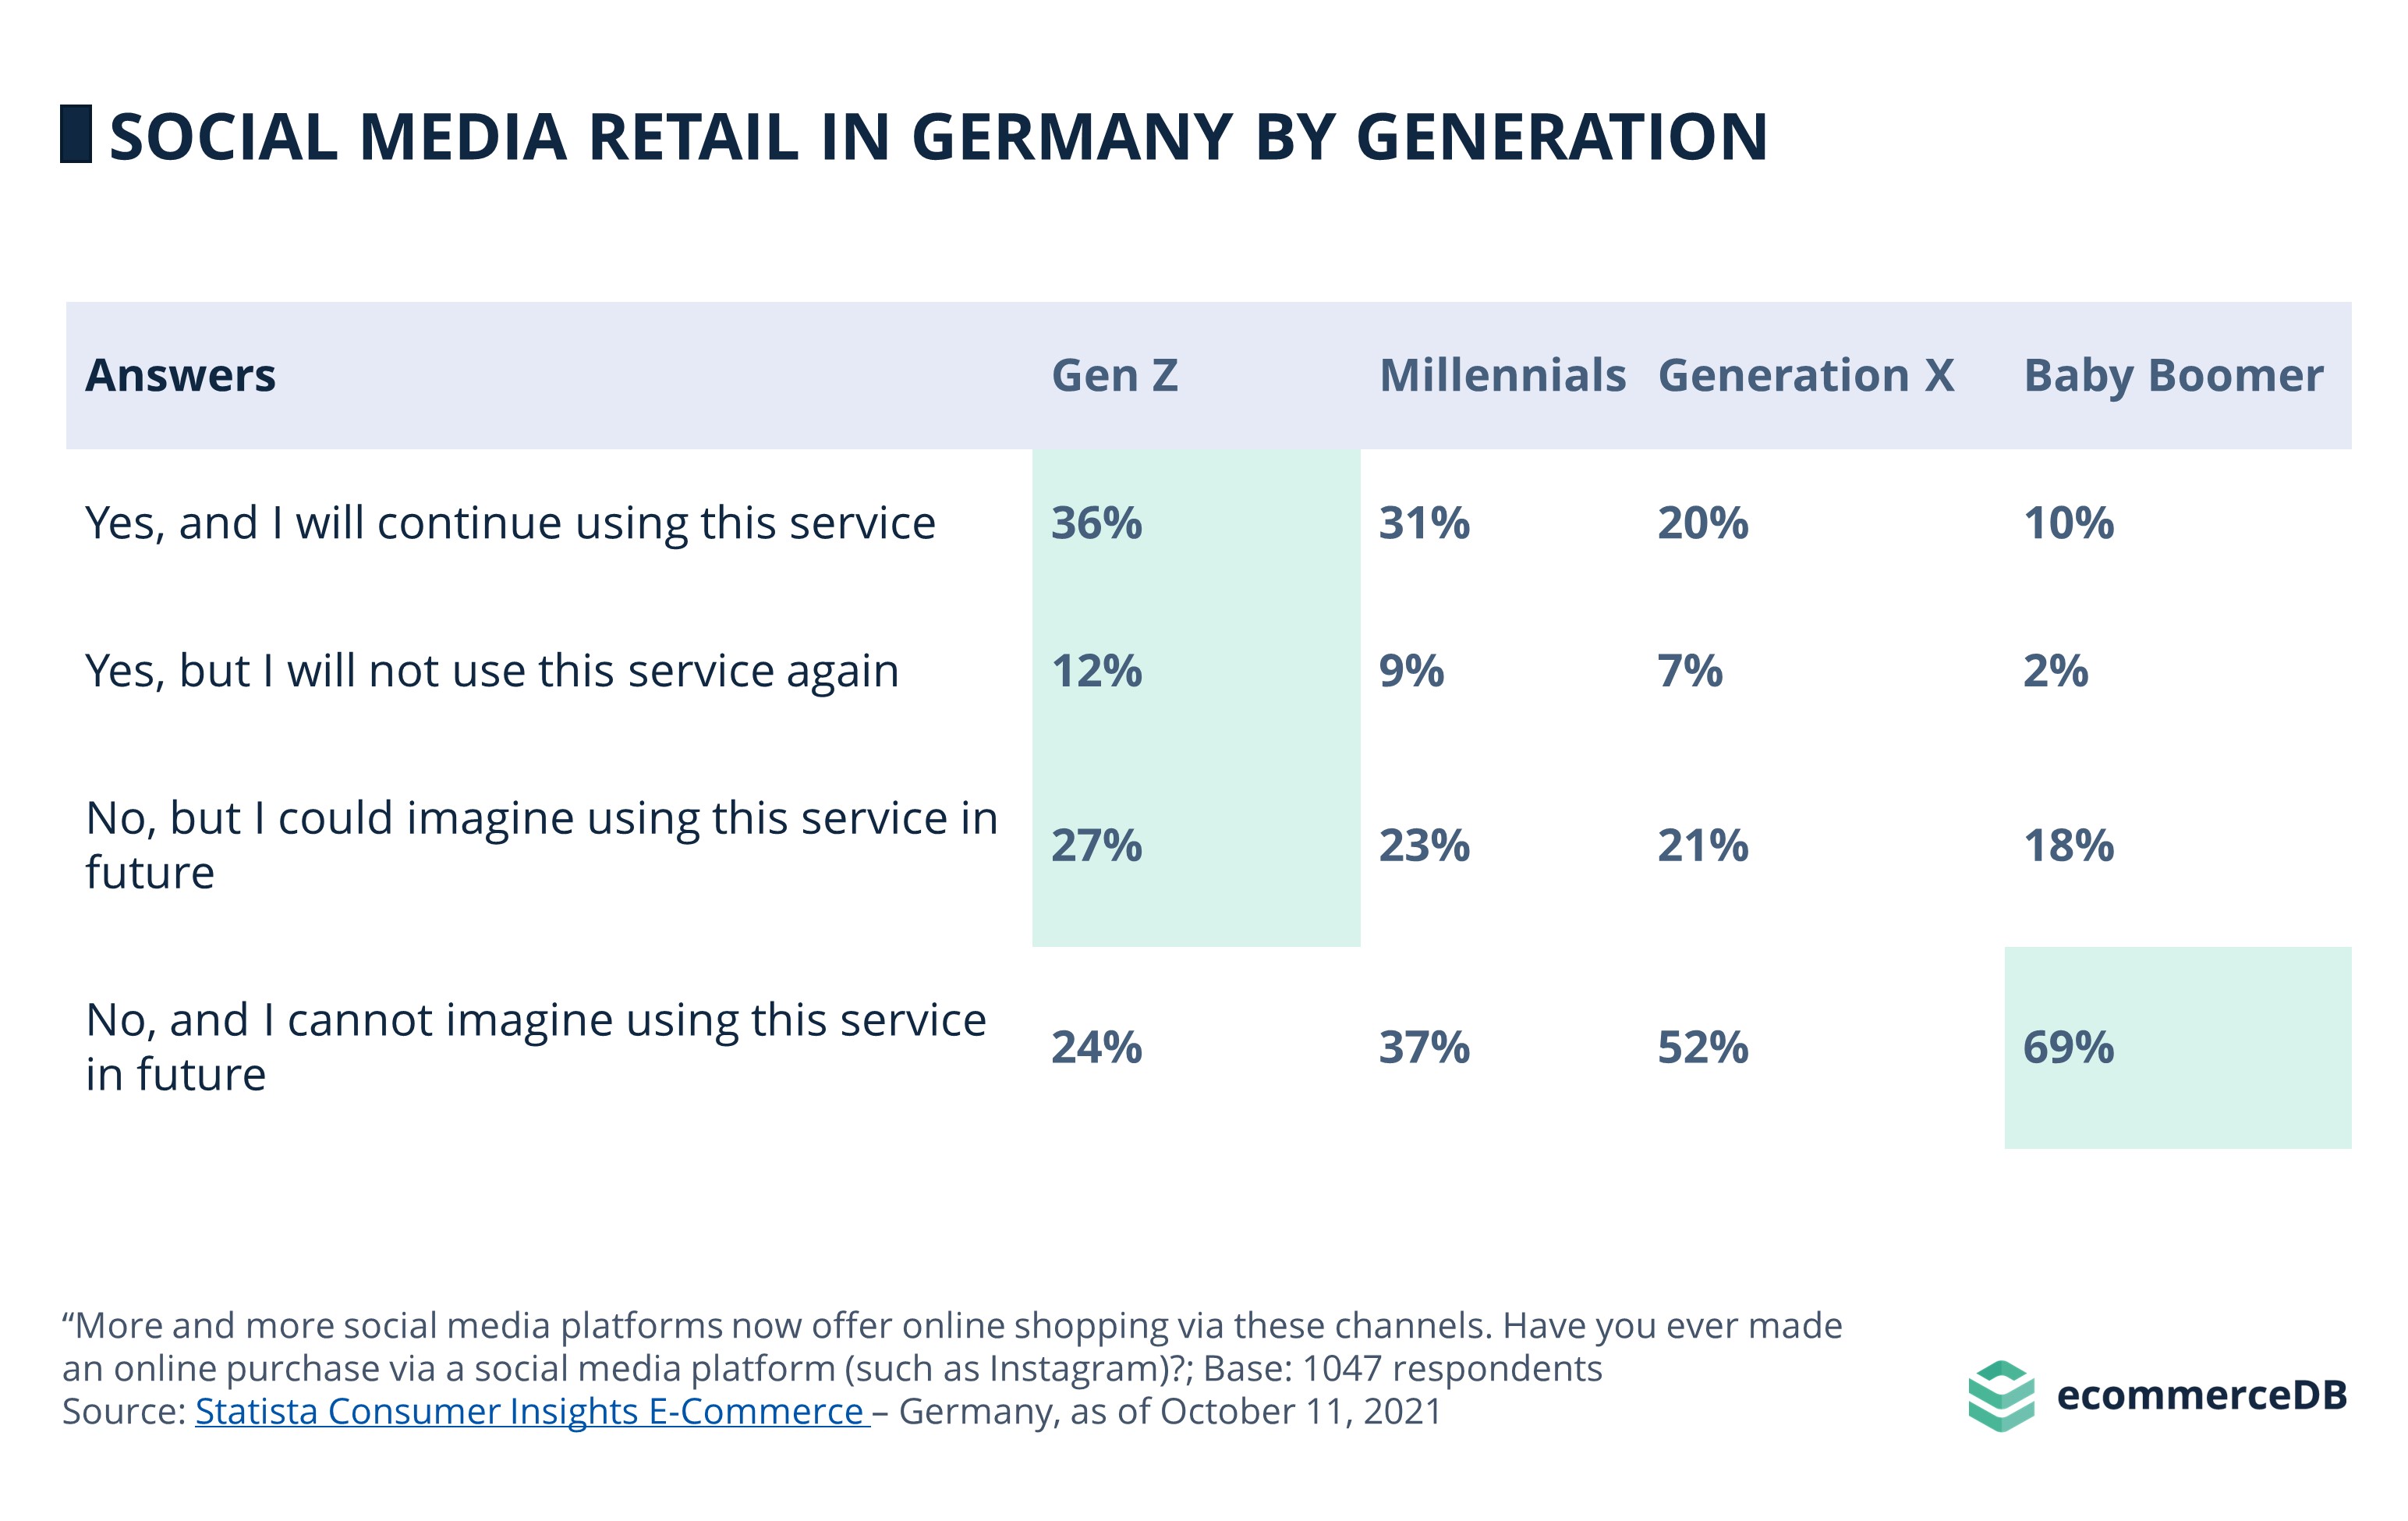 Social Commerce in Germany by generation